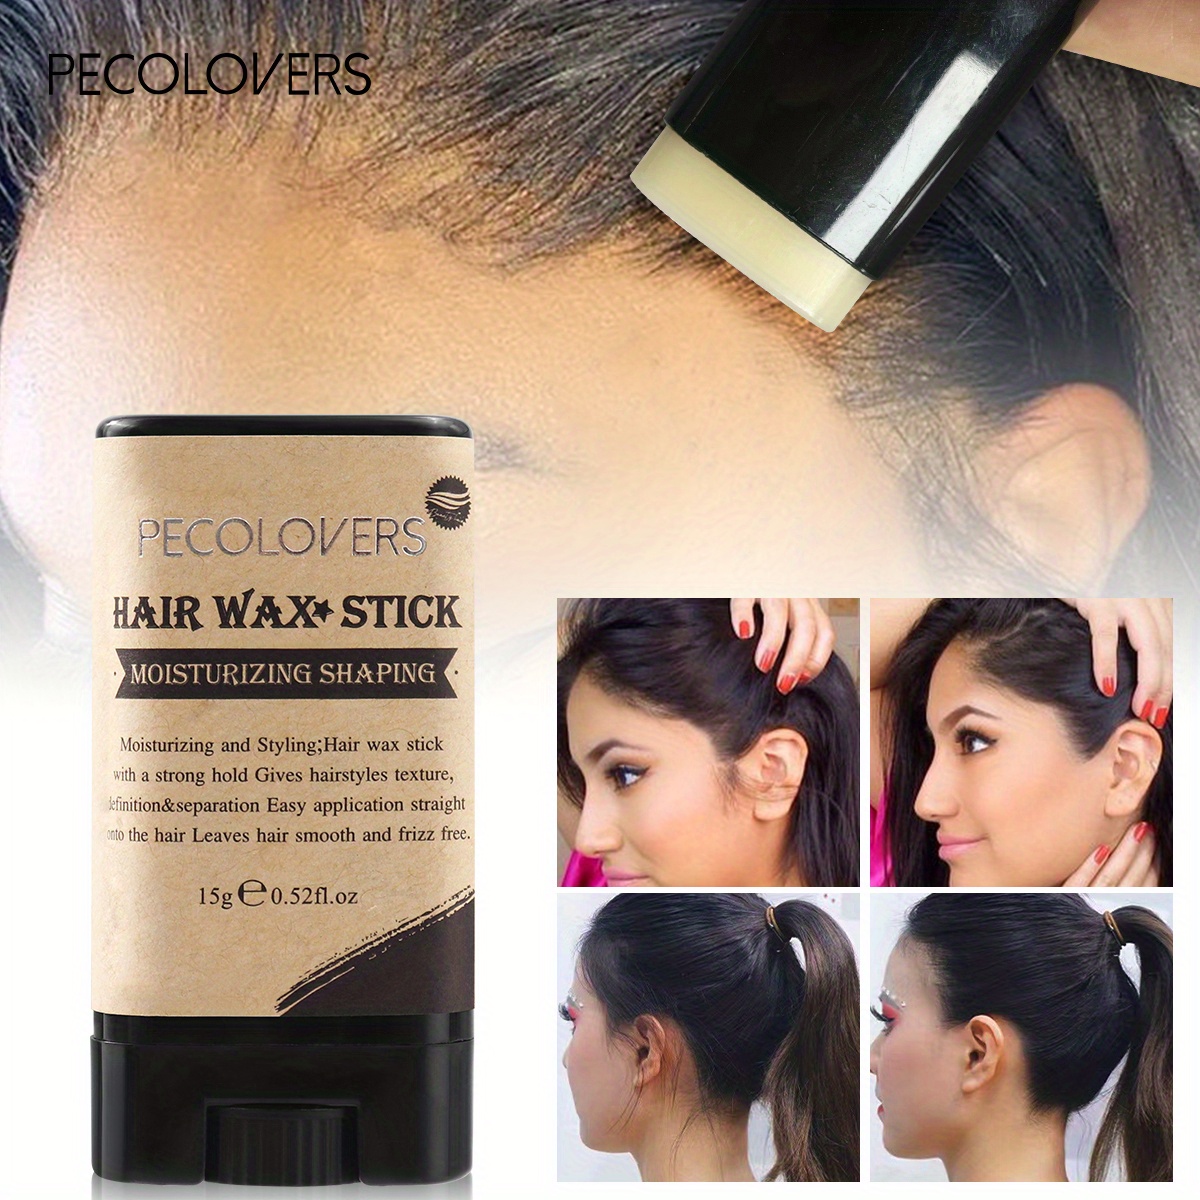  Hair Wax Stick, Wax Stick for Hair, Slick Stick for Hair  Non-greasy Styling Hair Pomade Stick, Strong Hold Makes Hair Look Neat and  Tidy : Beauty & Personal Care